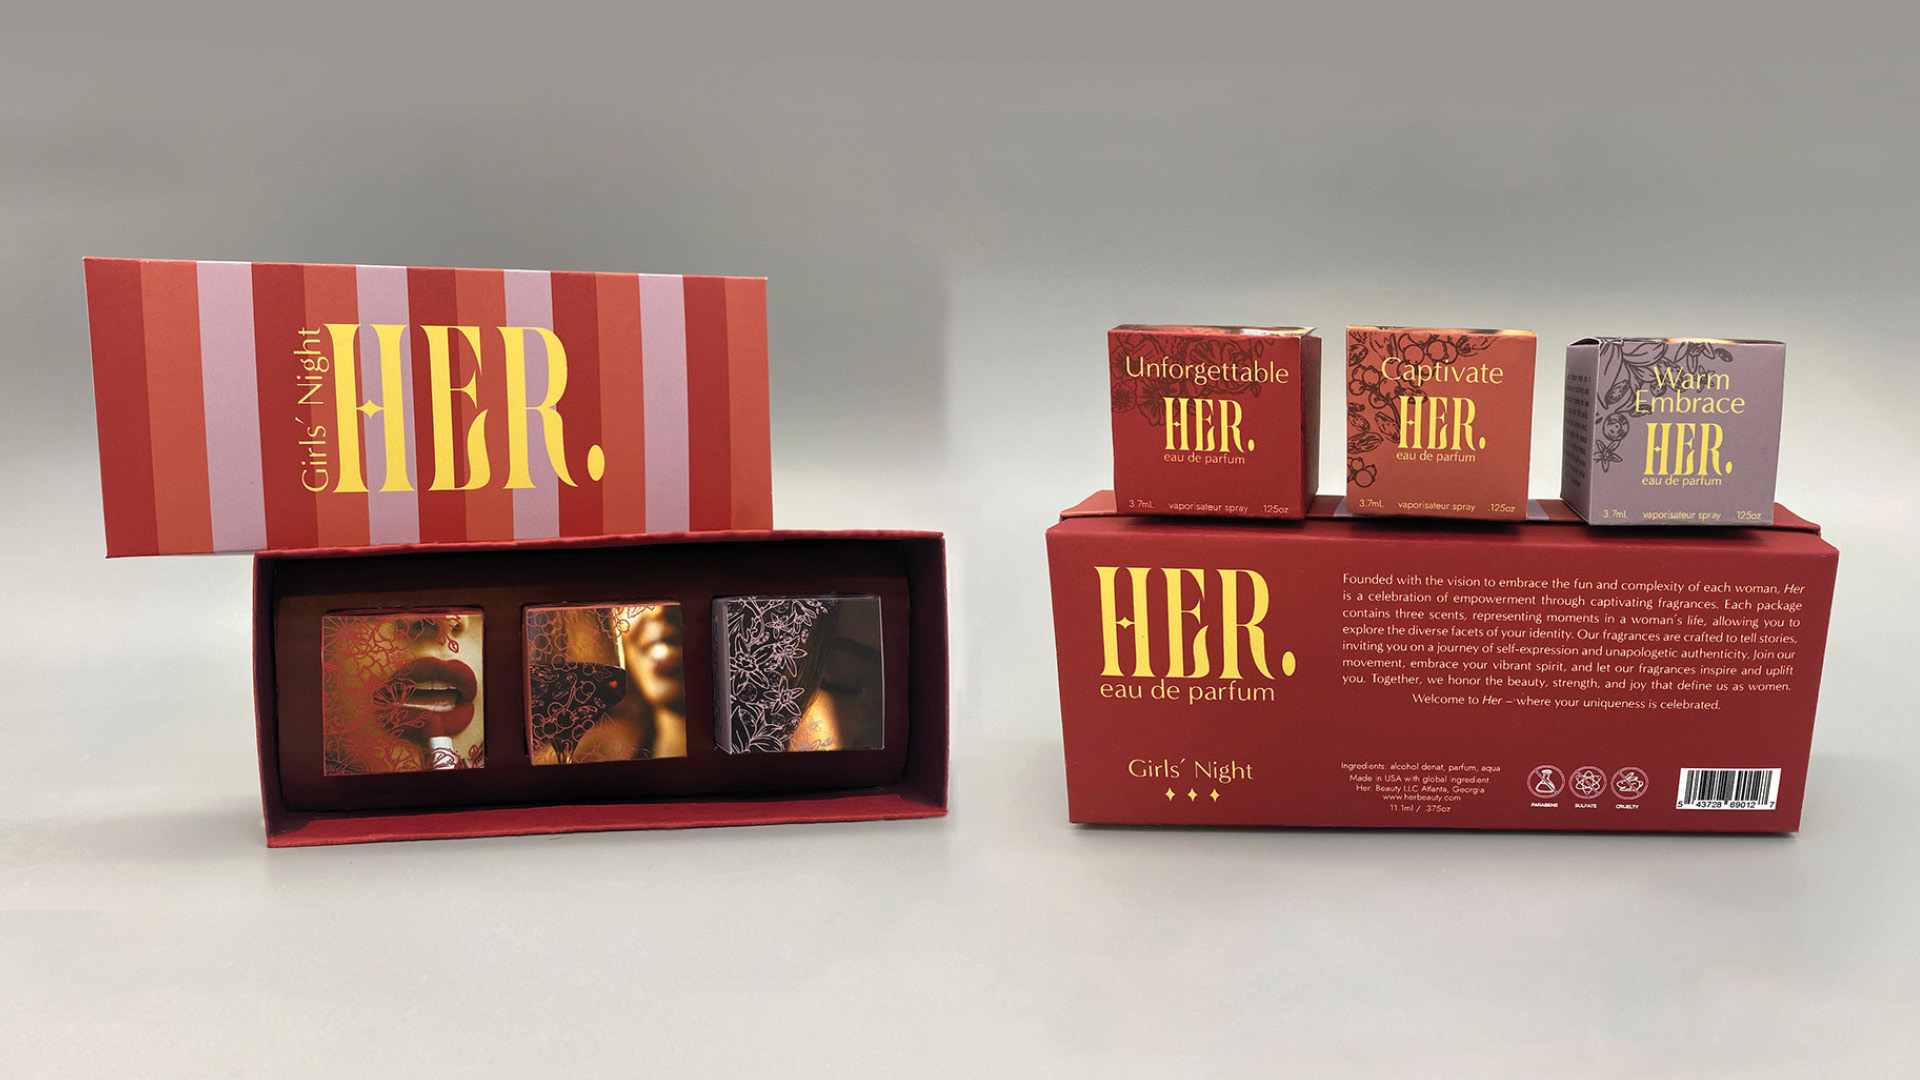 Her, Branding and Box Design / Her, Branding and Box Design, 2 1/4x9x3 3/4 inches print packaging, 2023. This branding and packaging was created for fictional perfume brand ‚ Her.